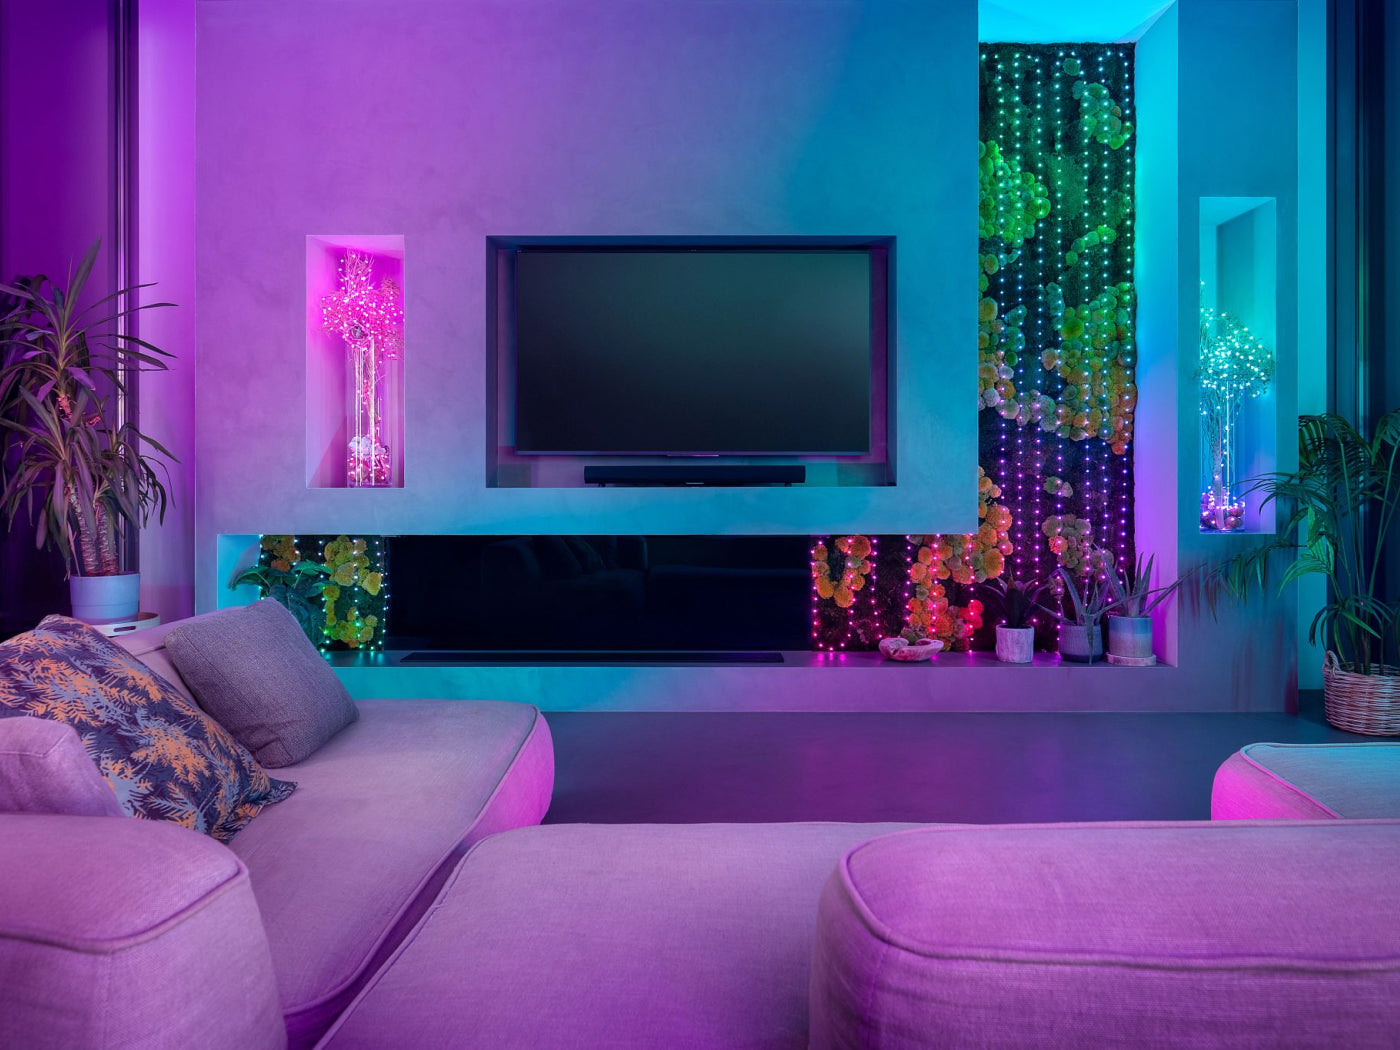 Get started with smart decorative lighting for everyday interior design